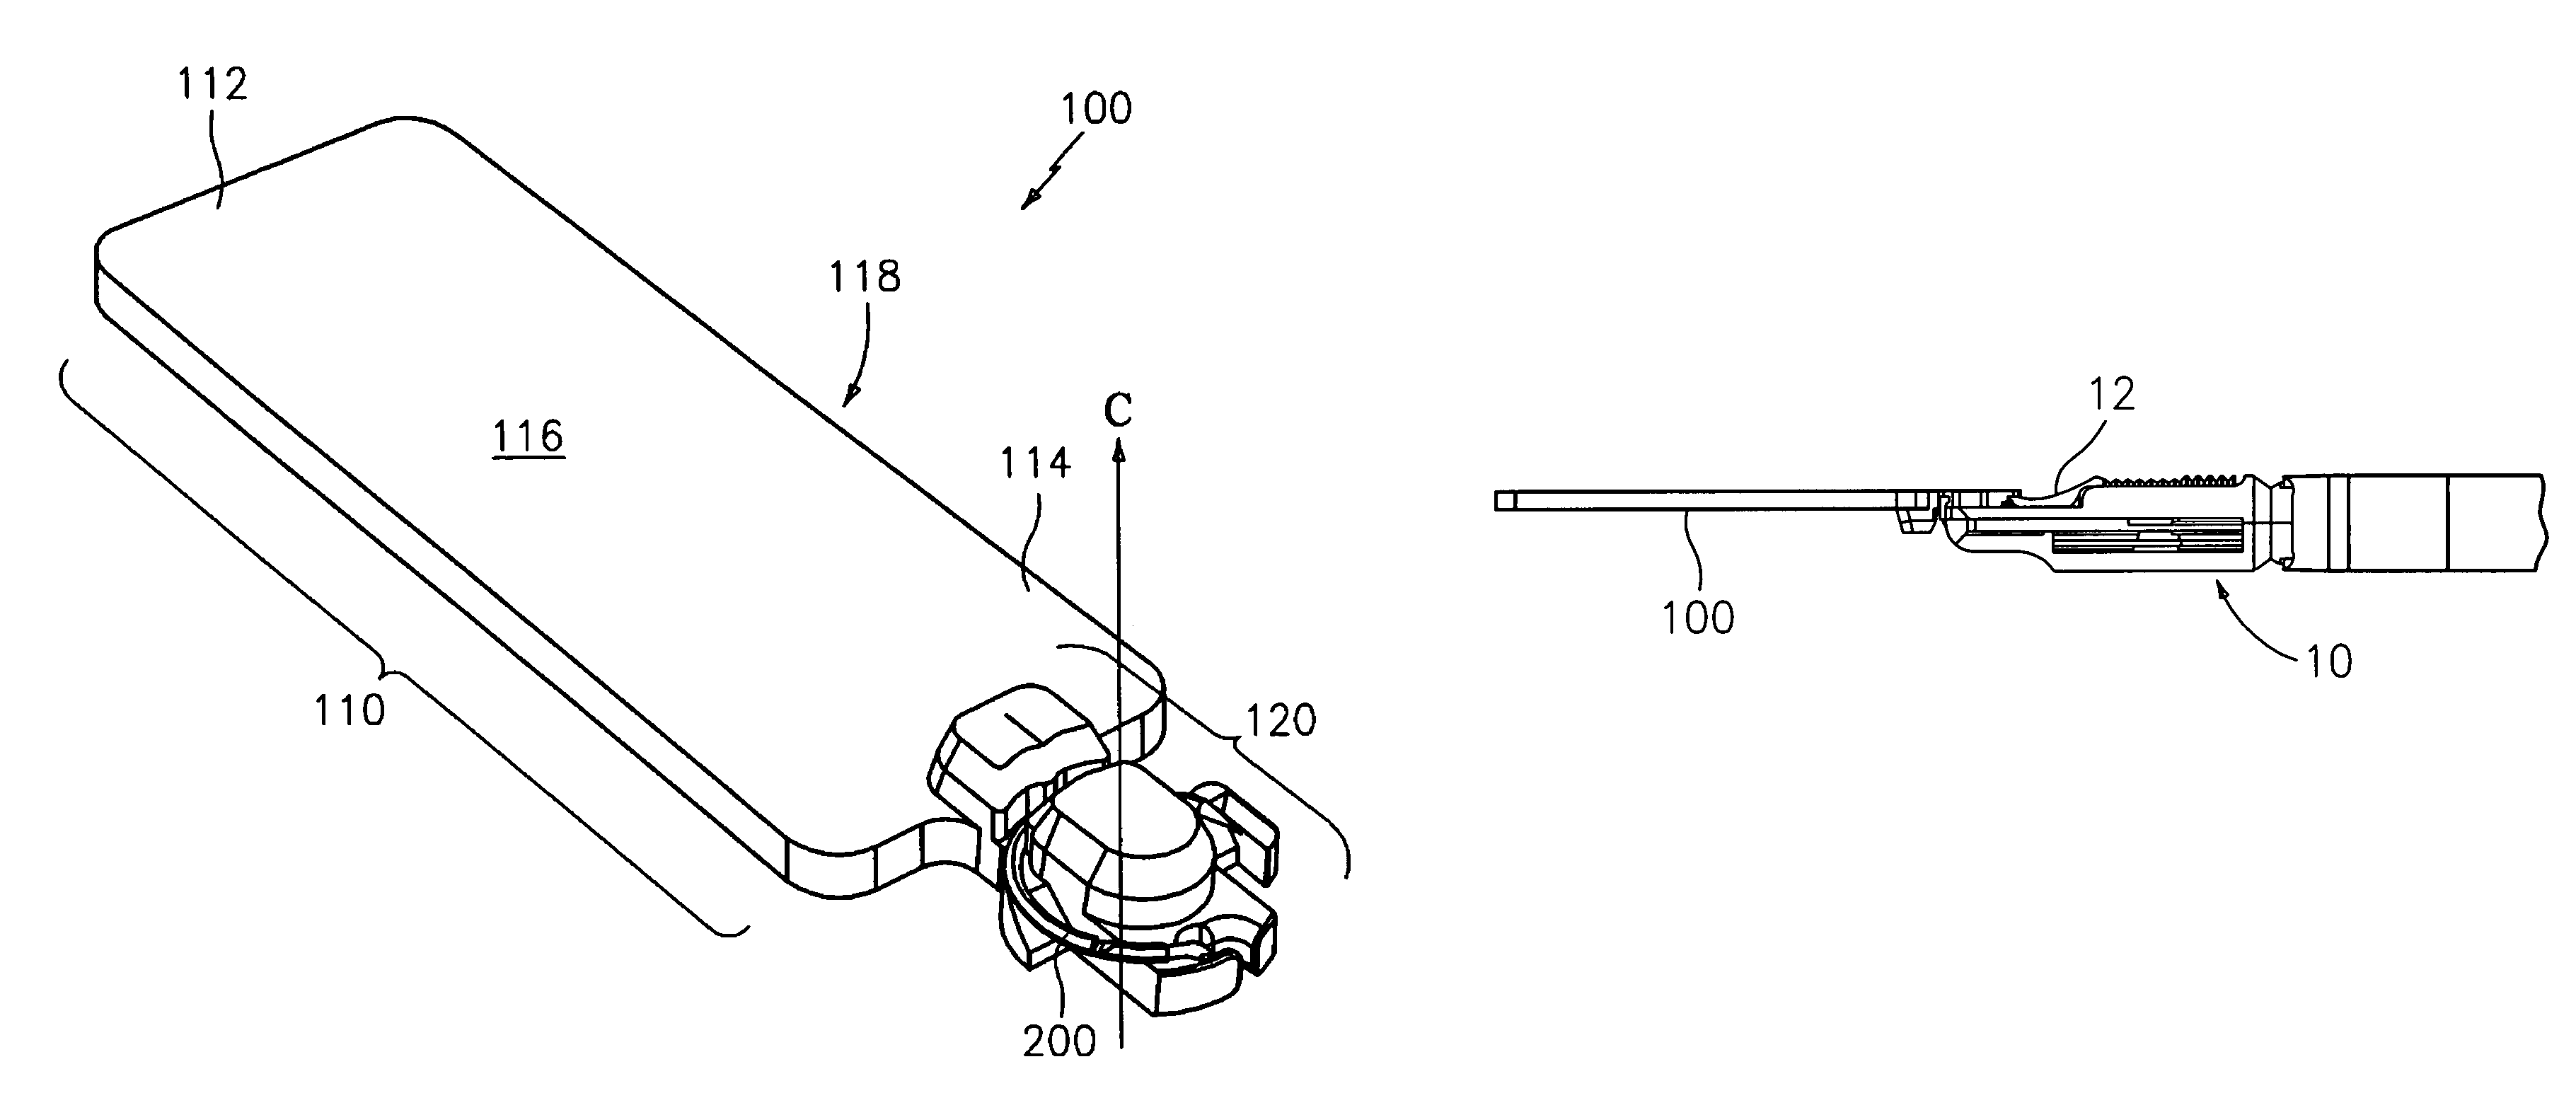 Apparatus and method for minimally invasive suturing